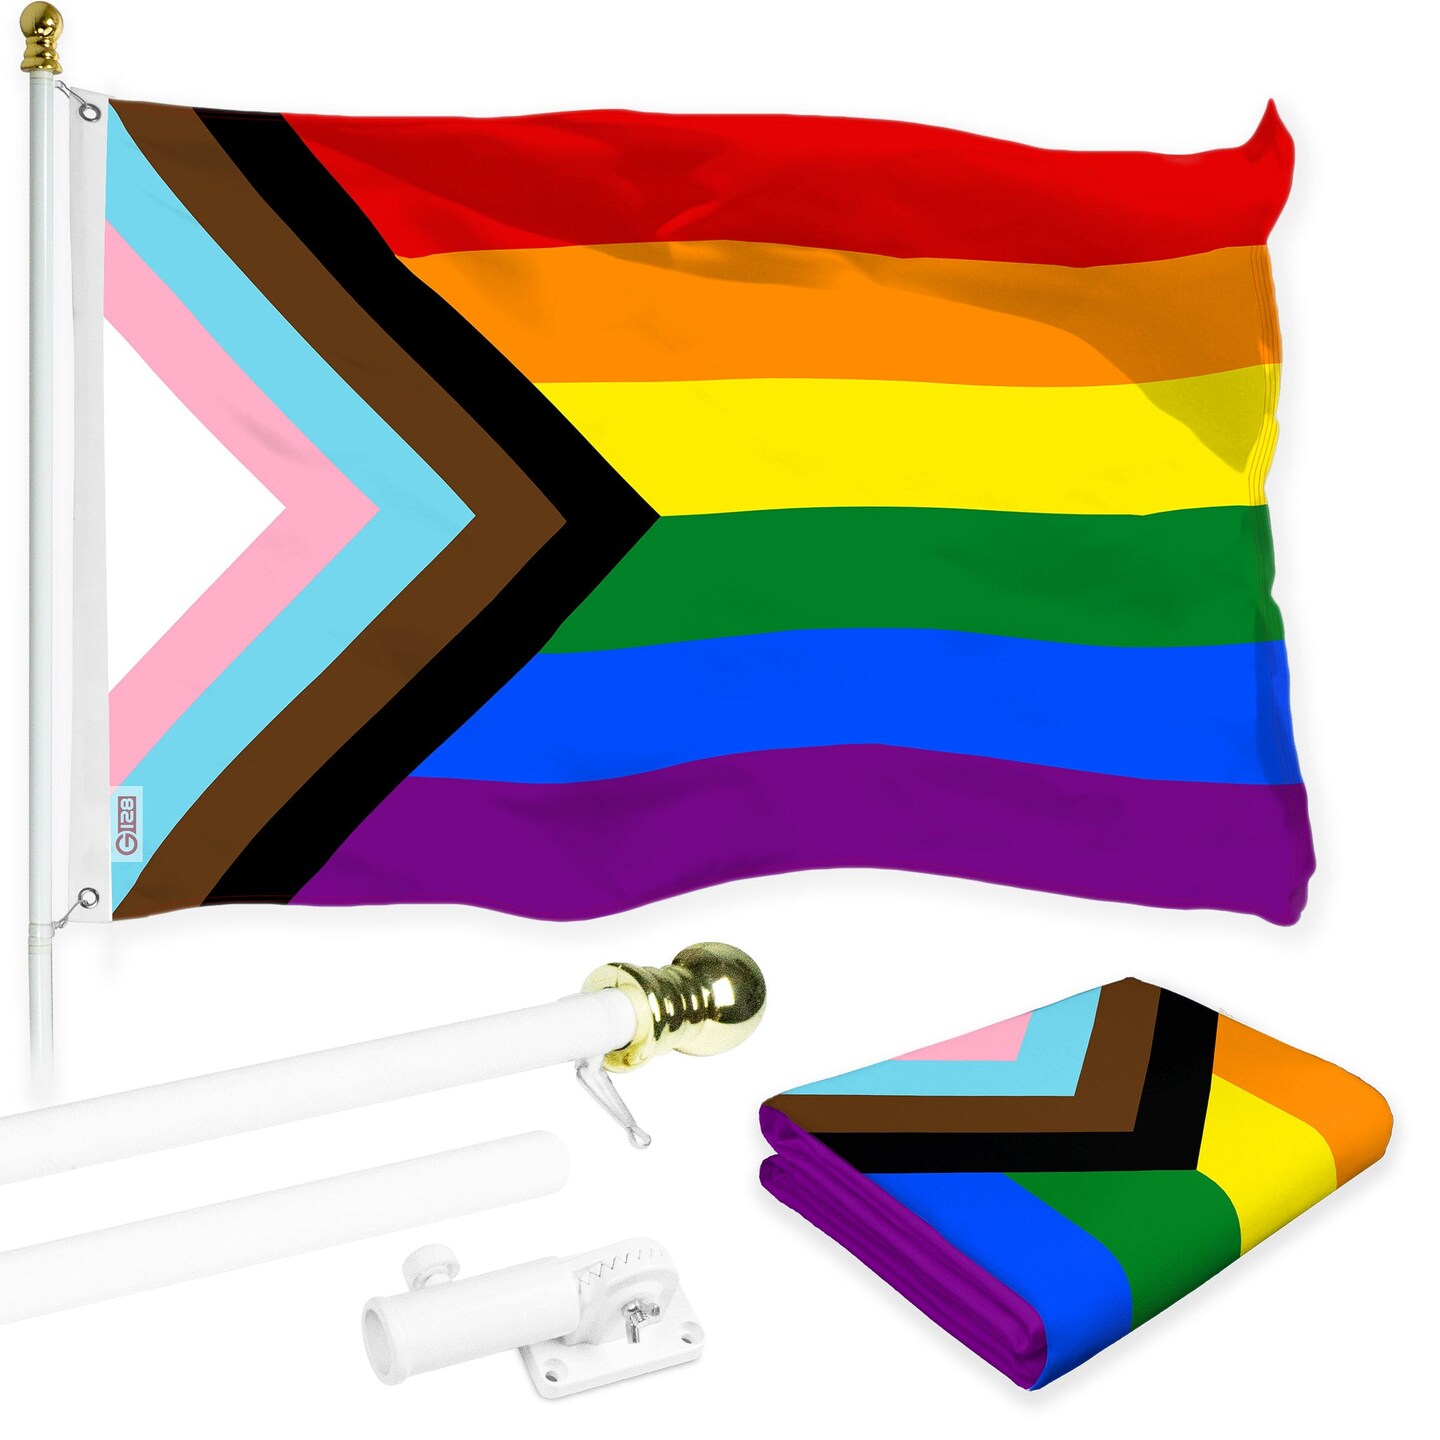 G128 Combo Pack: 6 Ft Tangle Free Aluminum Spinning Flagpole (White) &#x26; LGBT Progress Rainbow Pride Flag 3x5 Ft, LiteWeave Pro Series Printed 150D Polyester | Pole with Flag Included